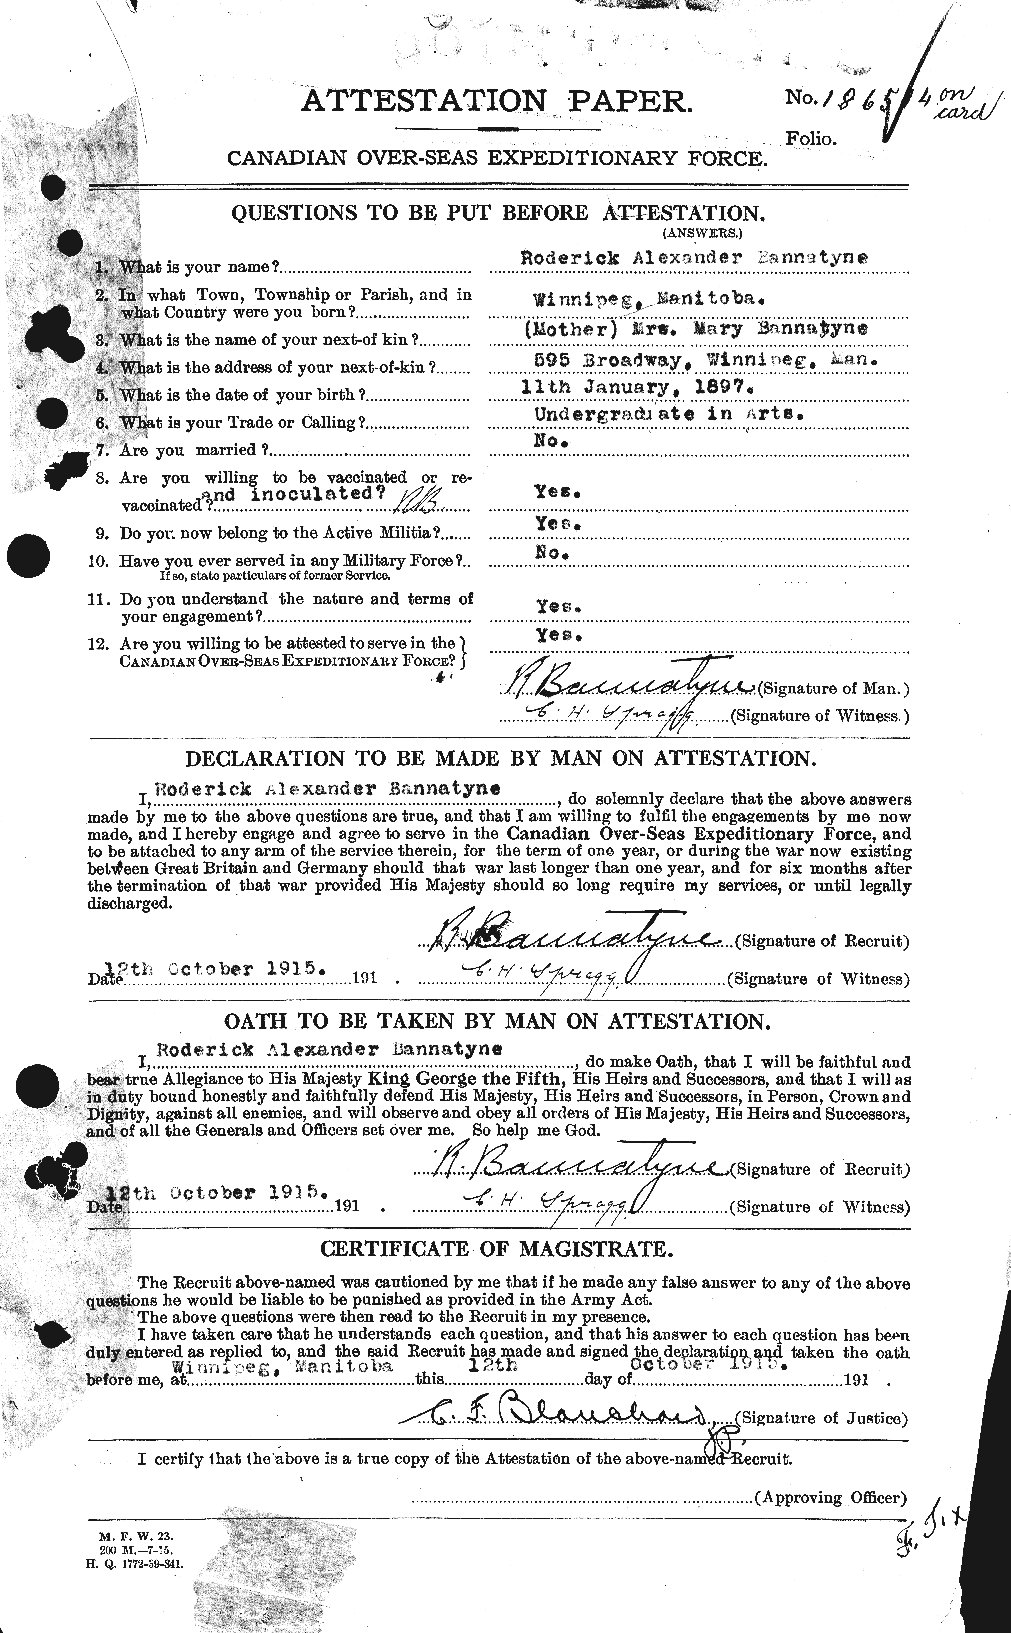 Personnel Records of the First World War - CEF 224893a